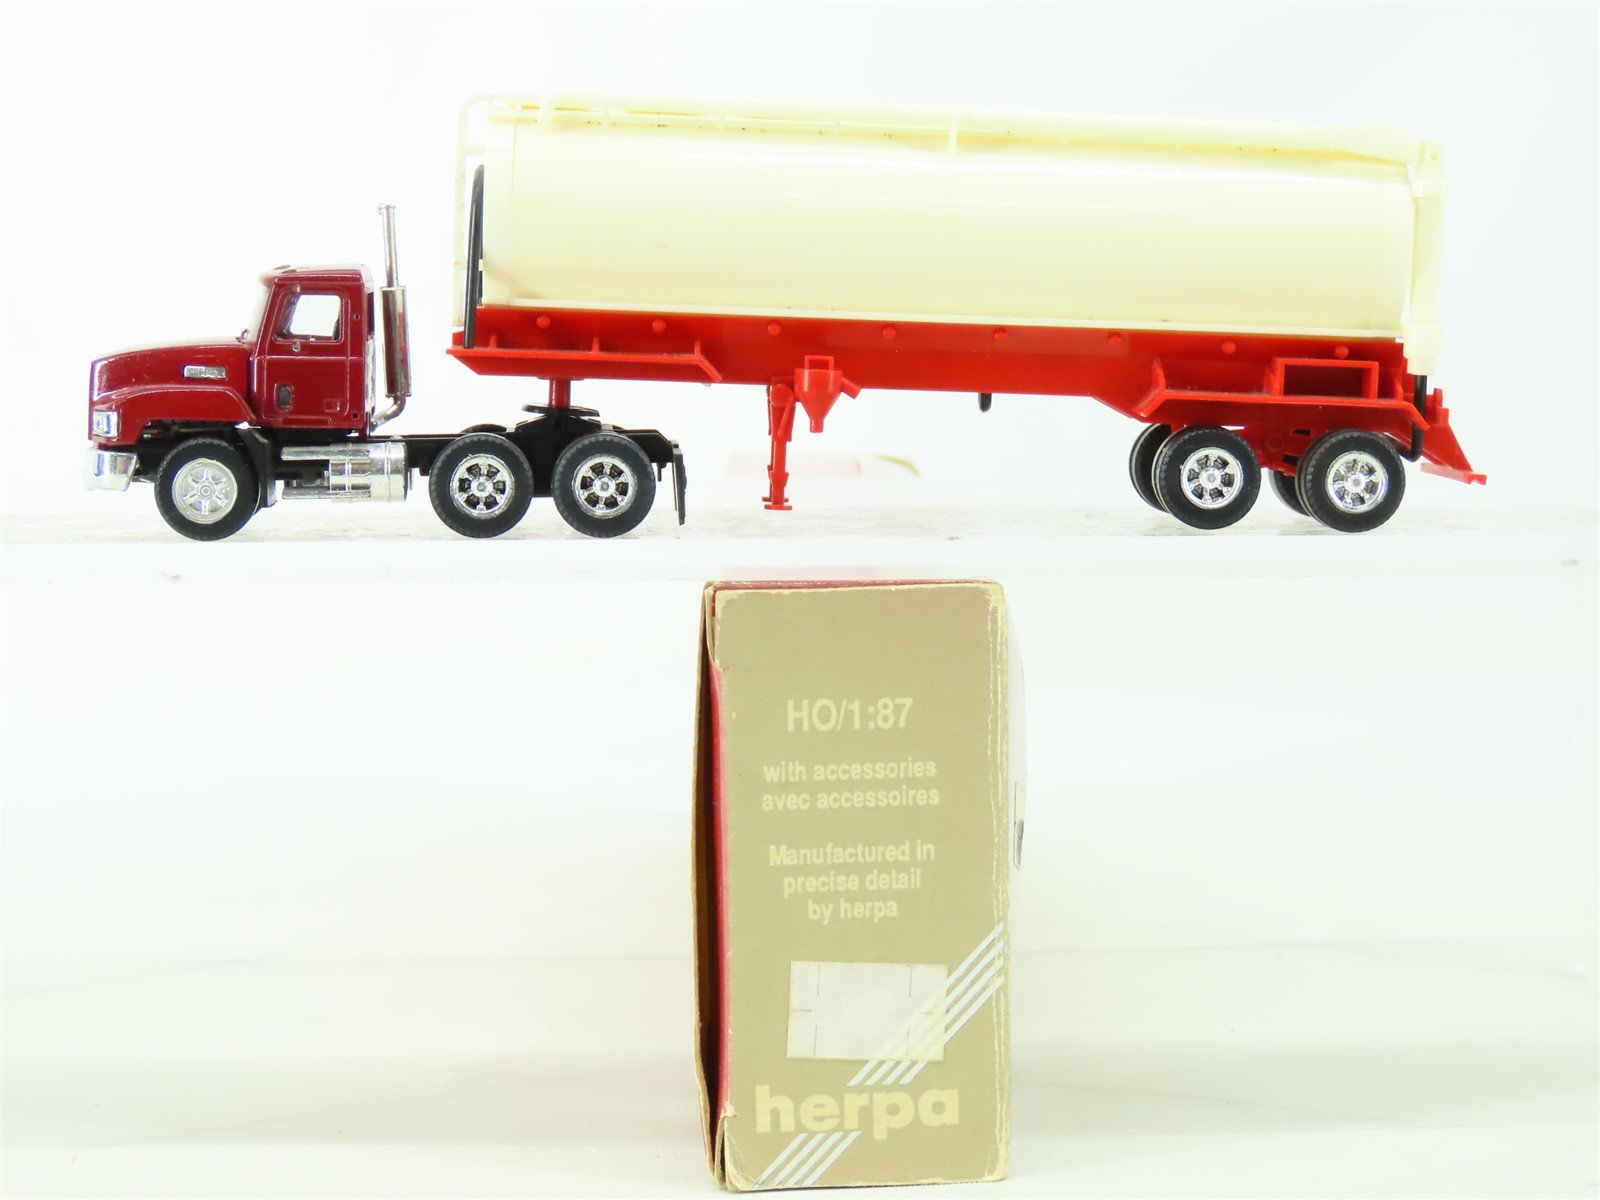 HO Scale Promotex/HERPA Mack Tractor w/ Undecorated Chemical Tanker